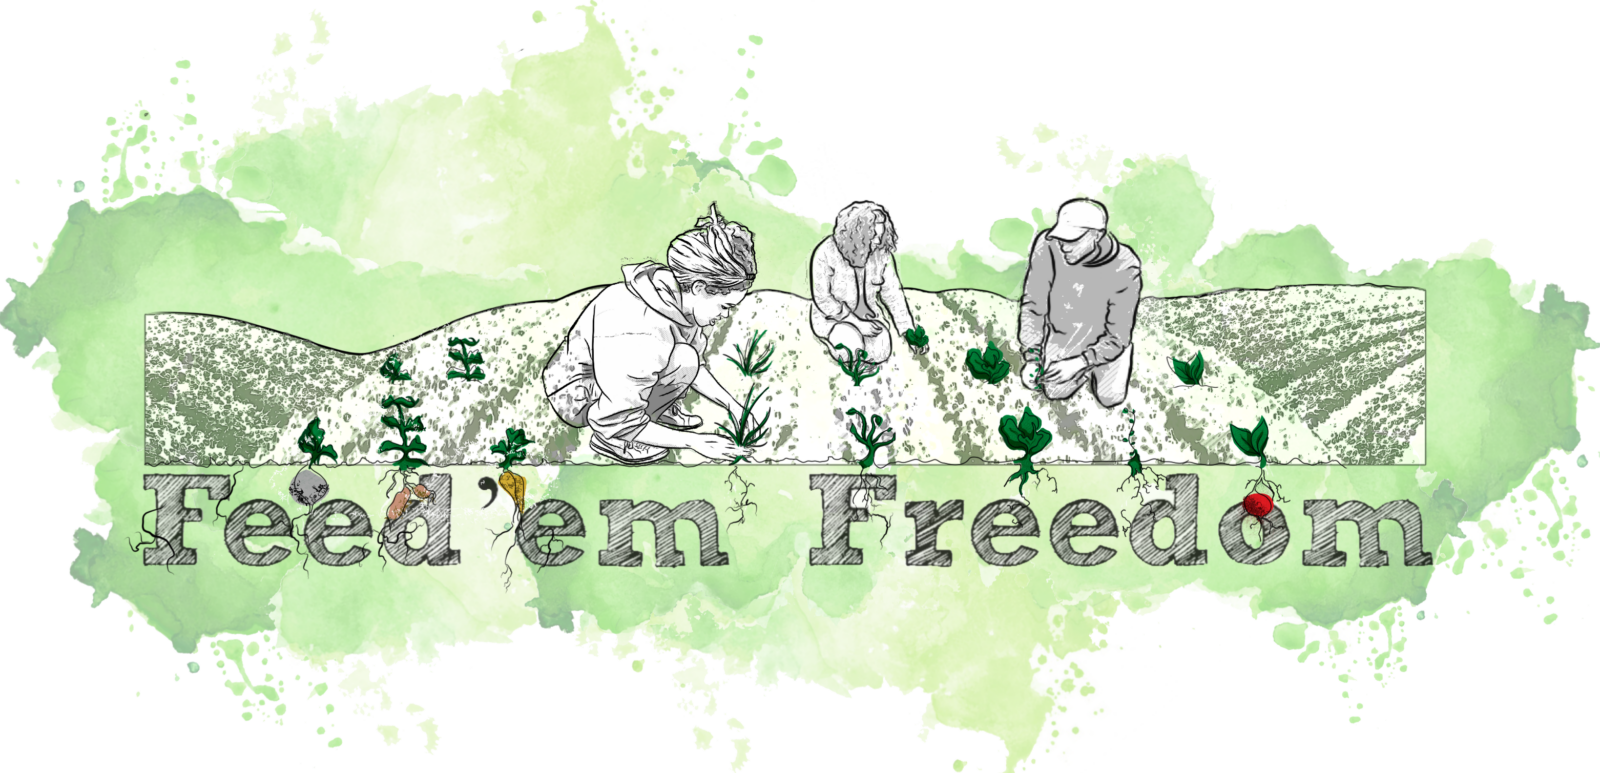 Three people work in a garden over the title Fee'dem Freedom